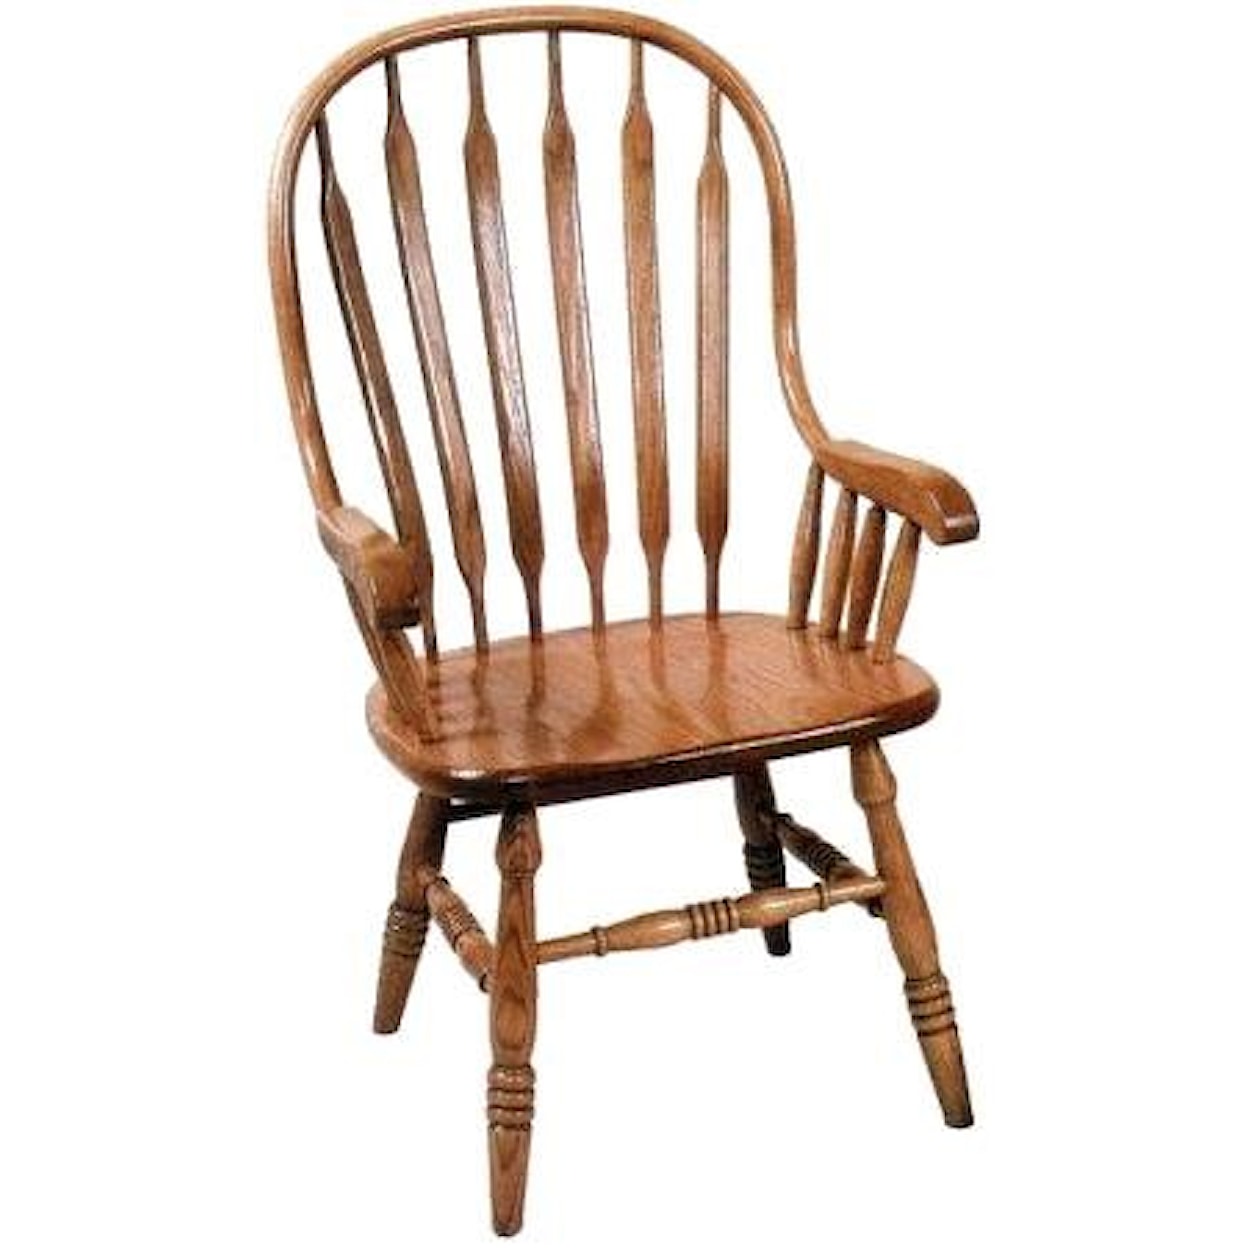 Wengerd Wood Products Jefferson Arm Chair